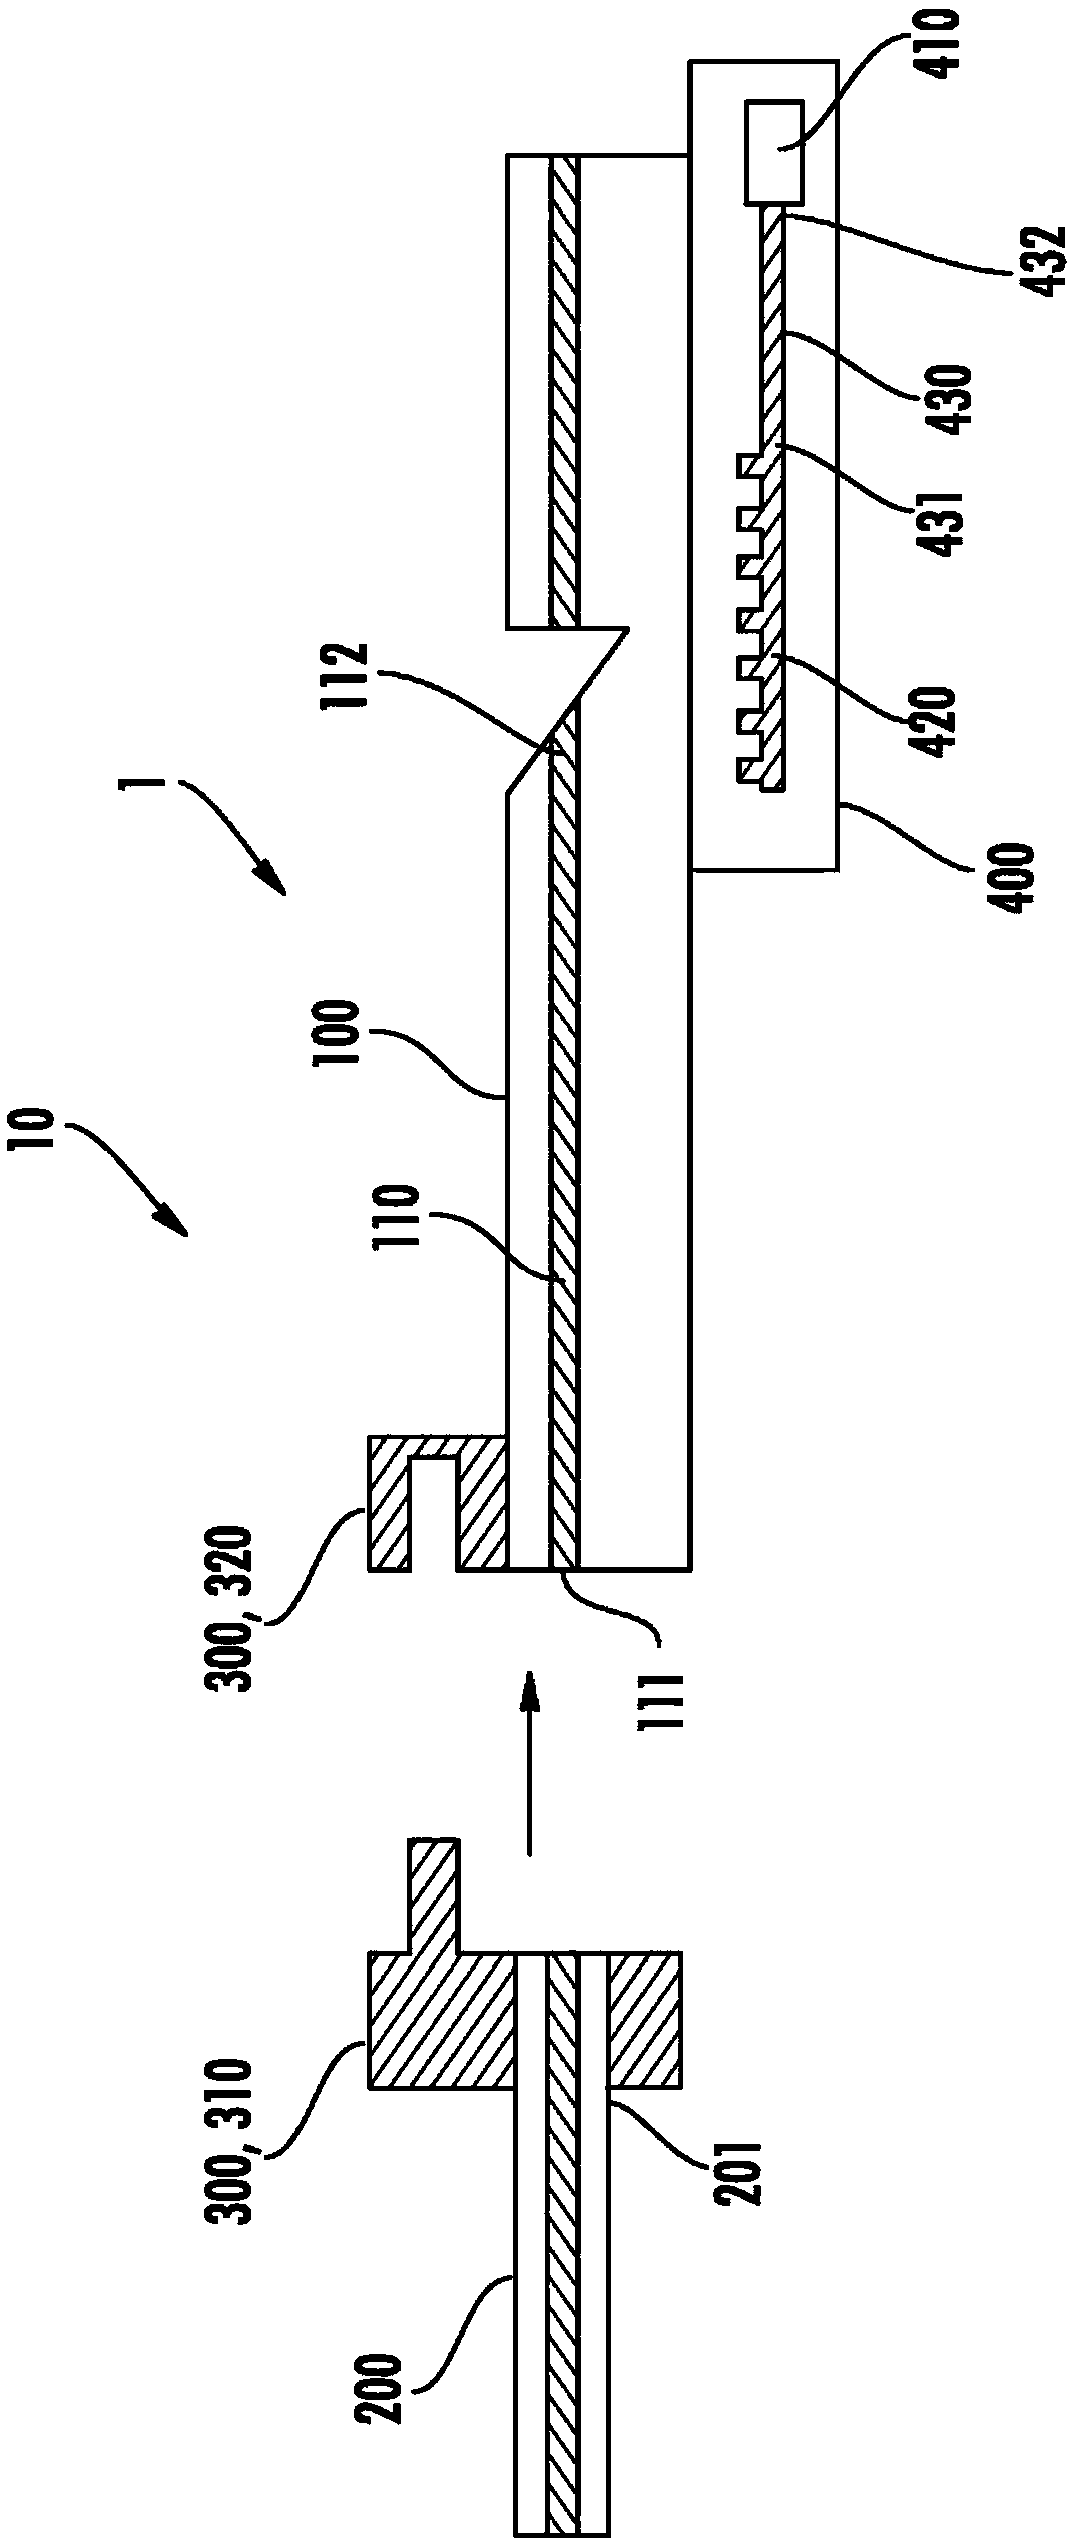 Interposer assemblies and arrangements for coupling at least one optical fiber to at least one optoelectronic device